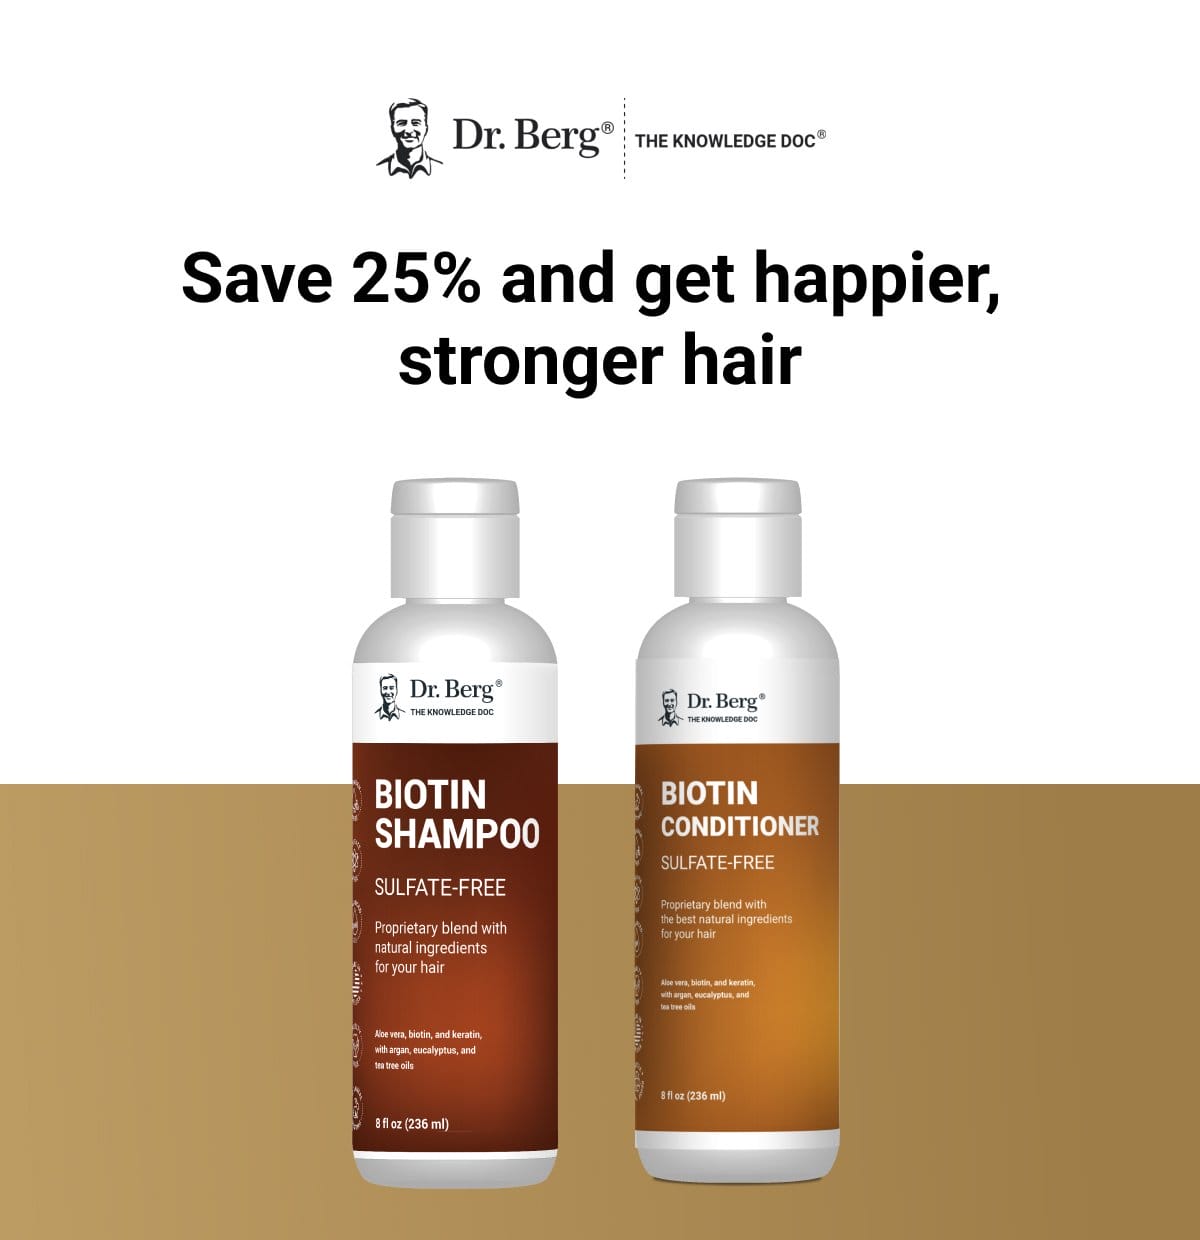 Save up to 25% on our biotin hair products